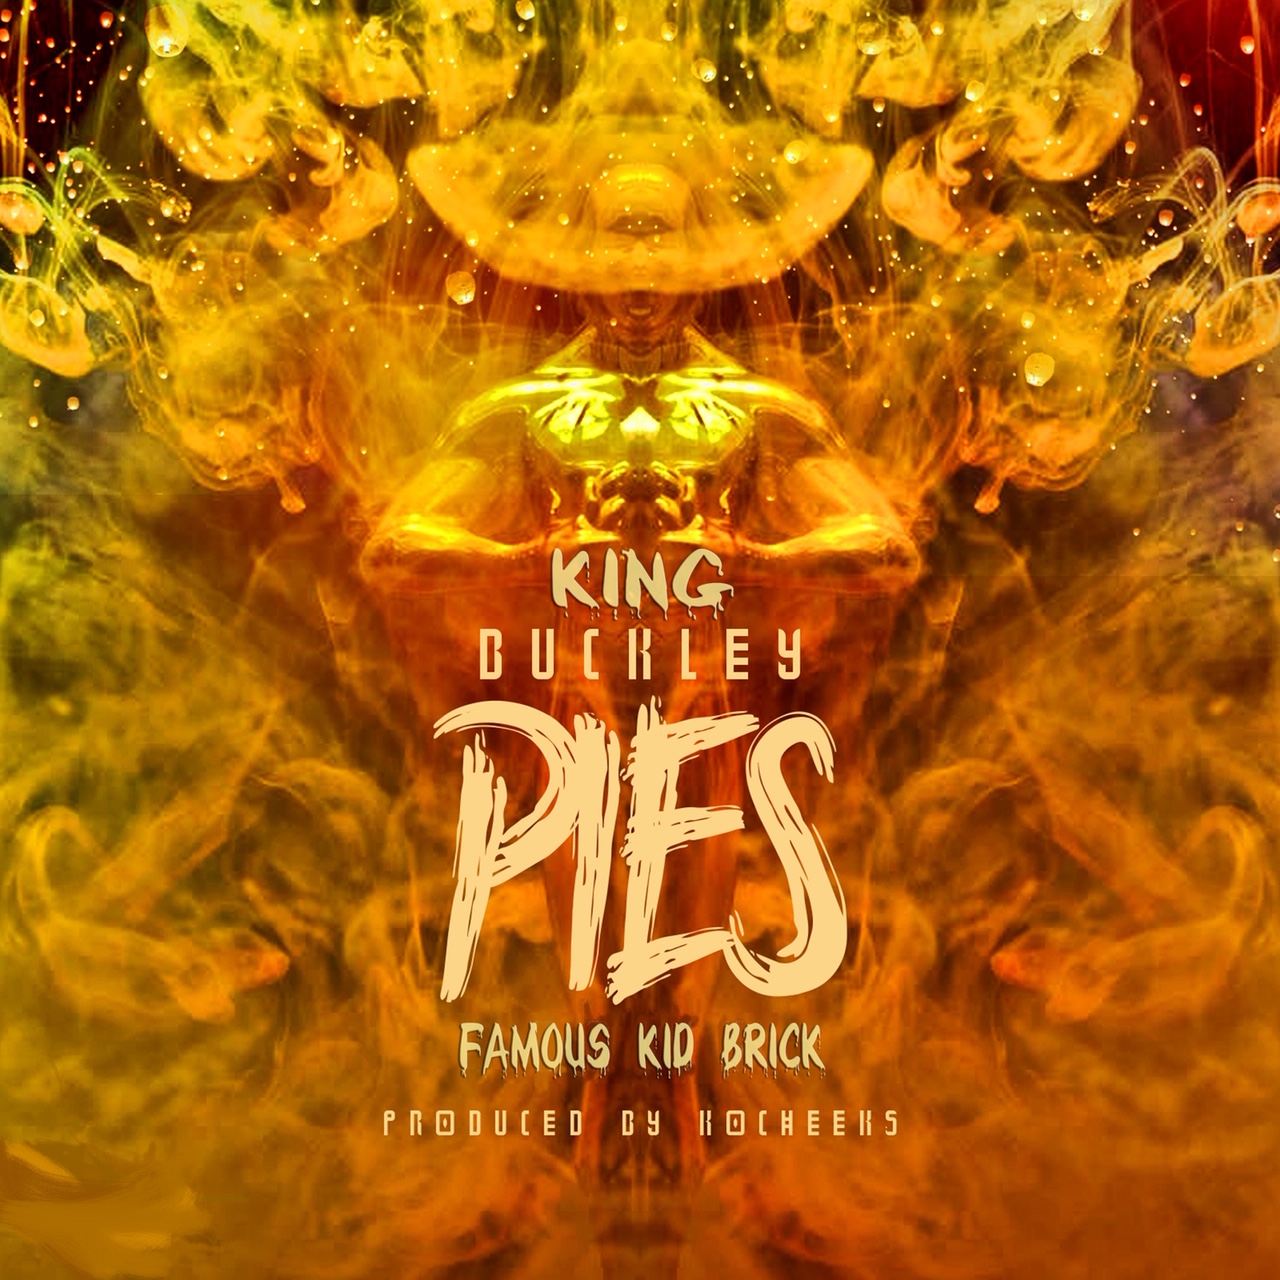 King Buckley ready to turn that fire up with new hit “Pies” @realkingbuckley